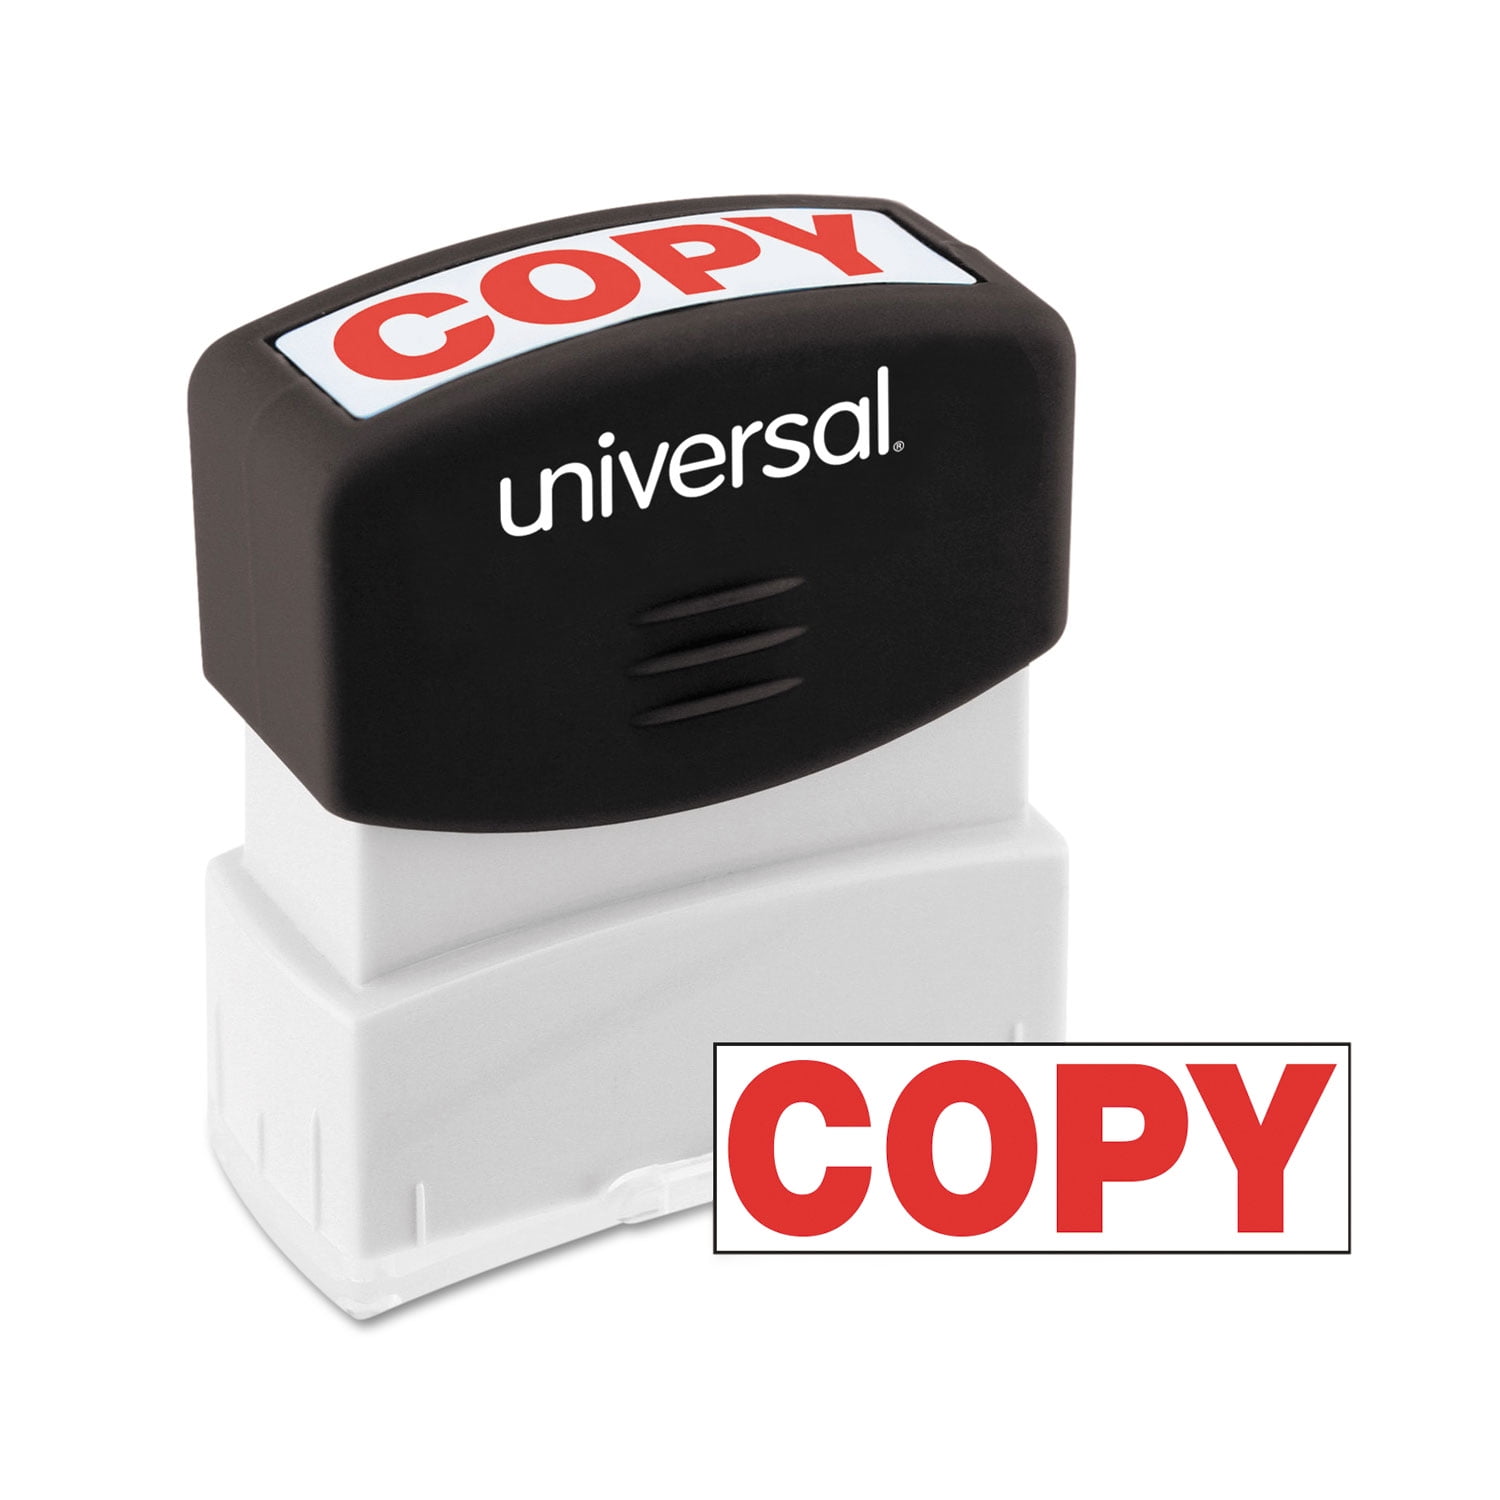 Immigration Control Red Ink Stamp Digital Art by Bigalbaloo Stock - Pixels